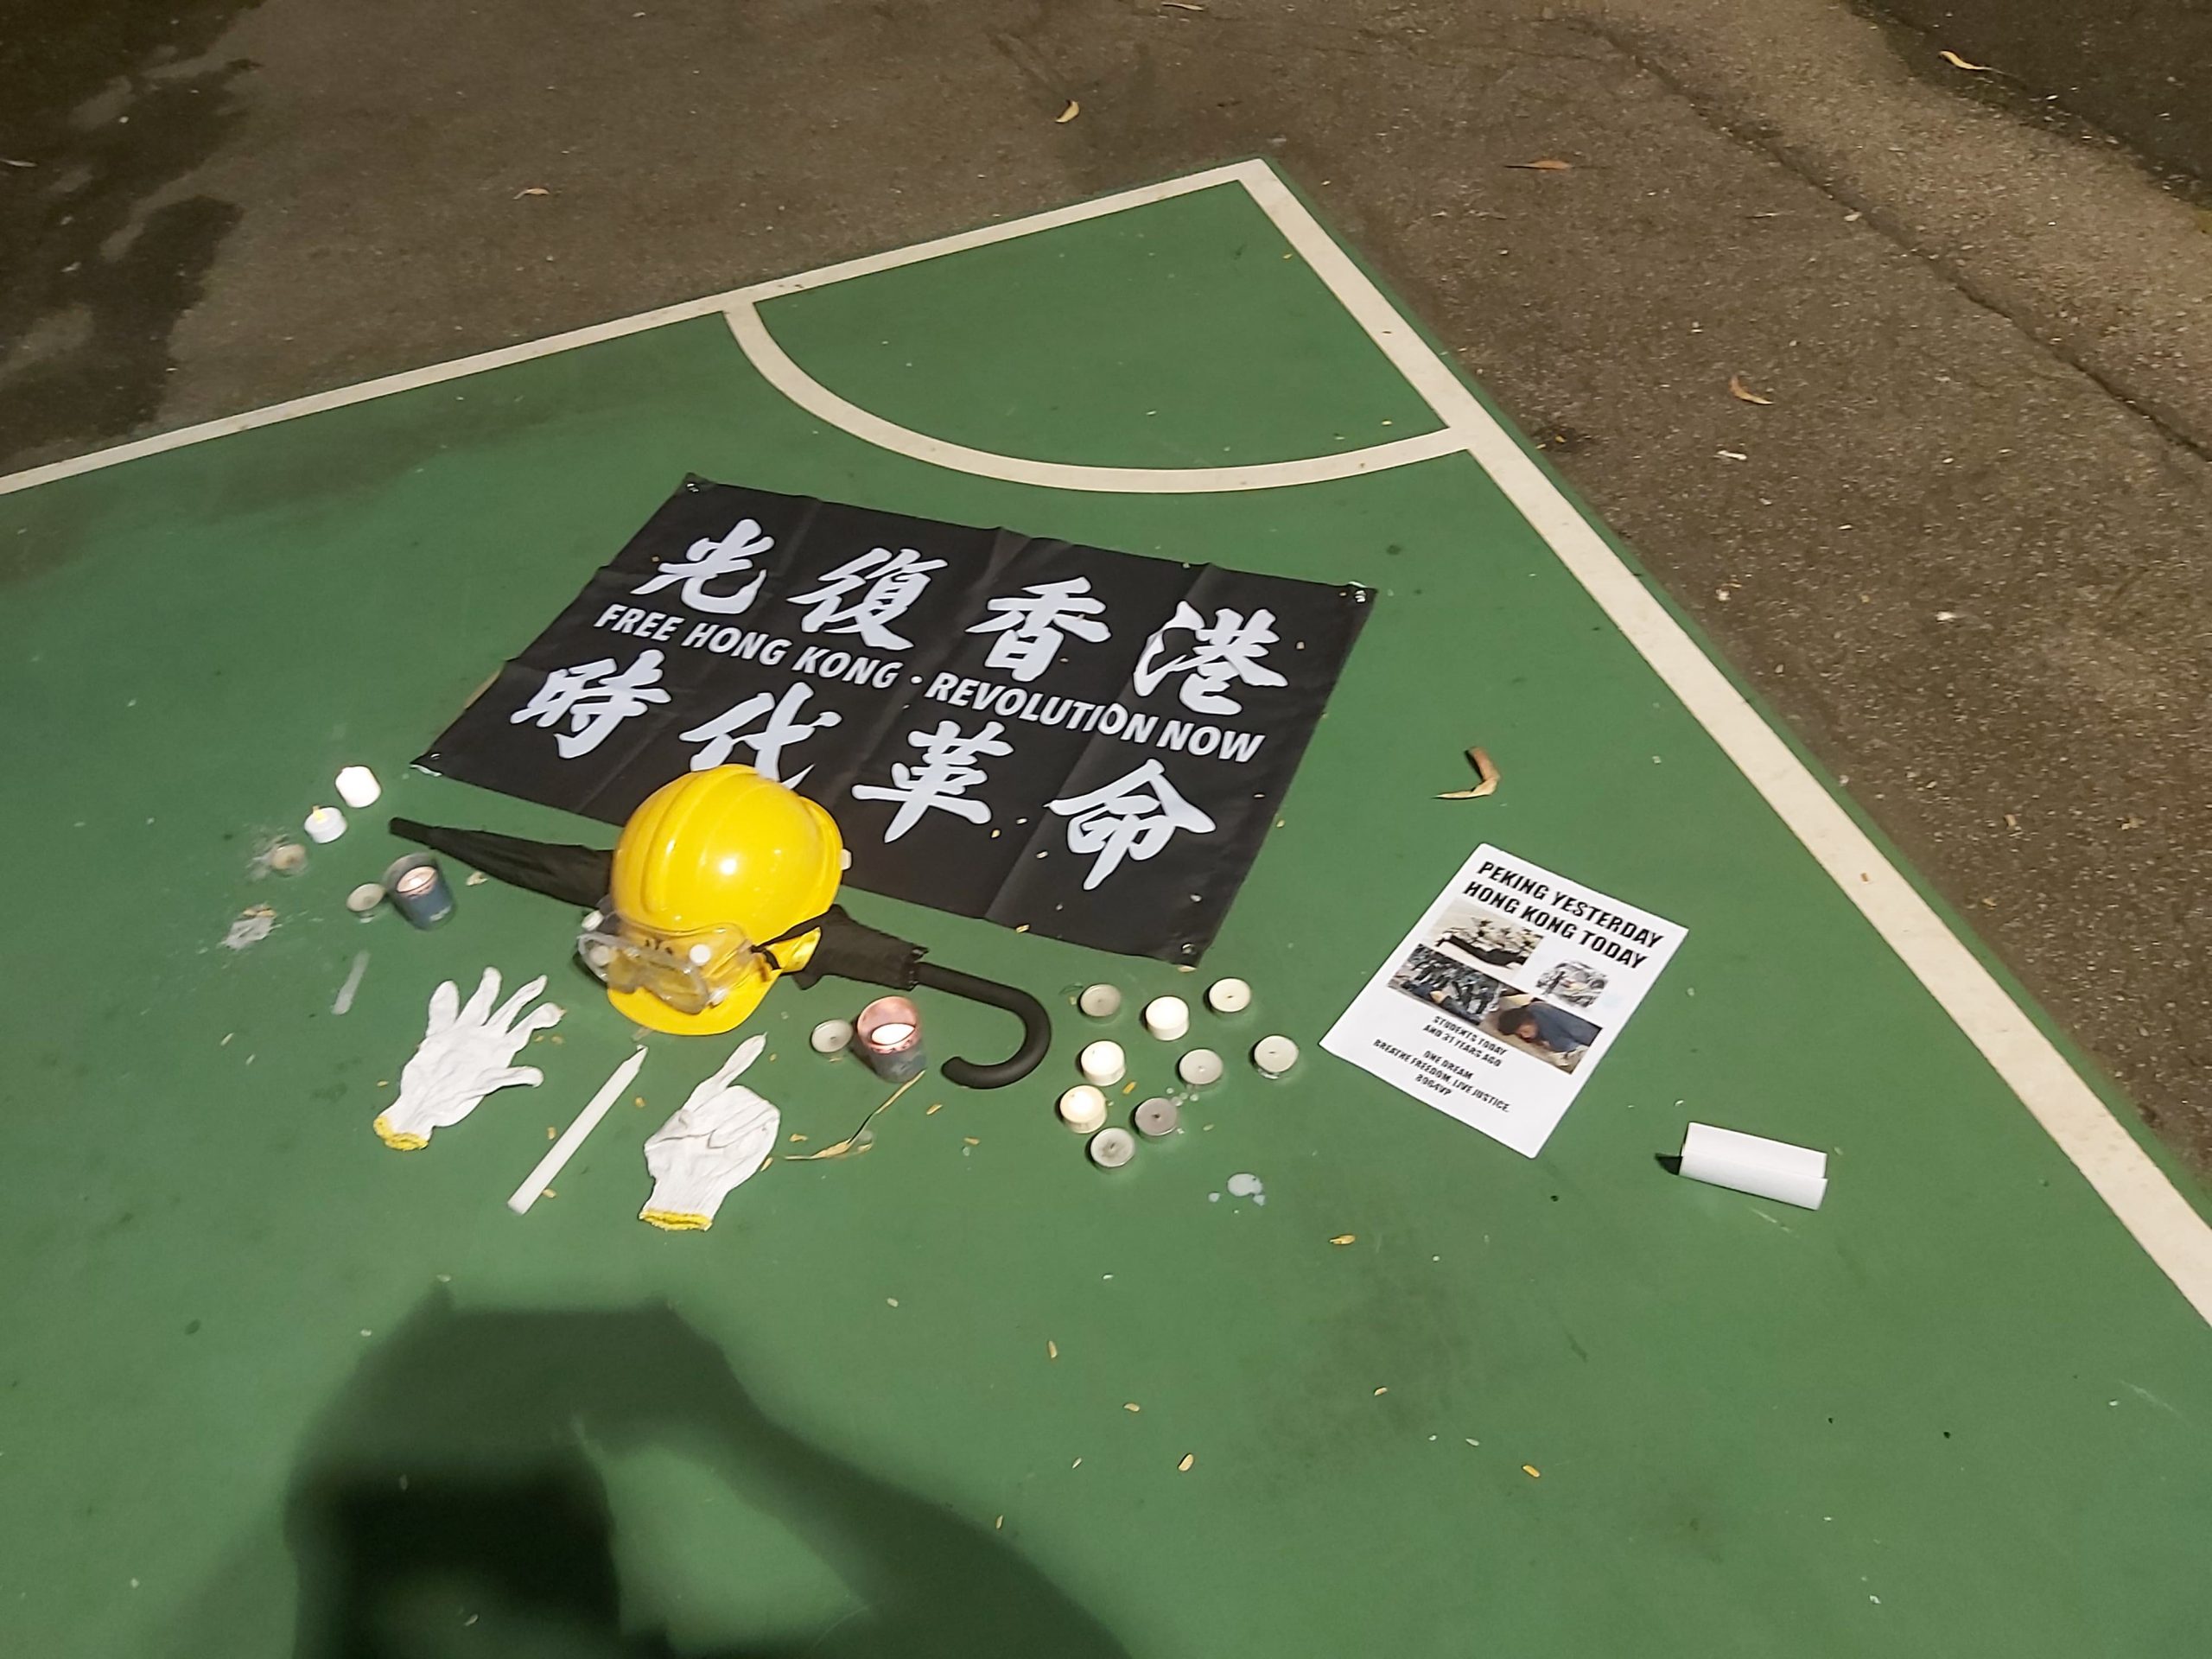 Candlelight vigil for the 31st anniversary of the June 4th incident in Victoria Park, Hong Kong